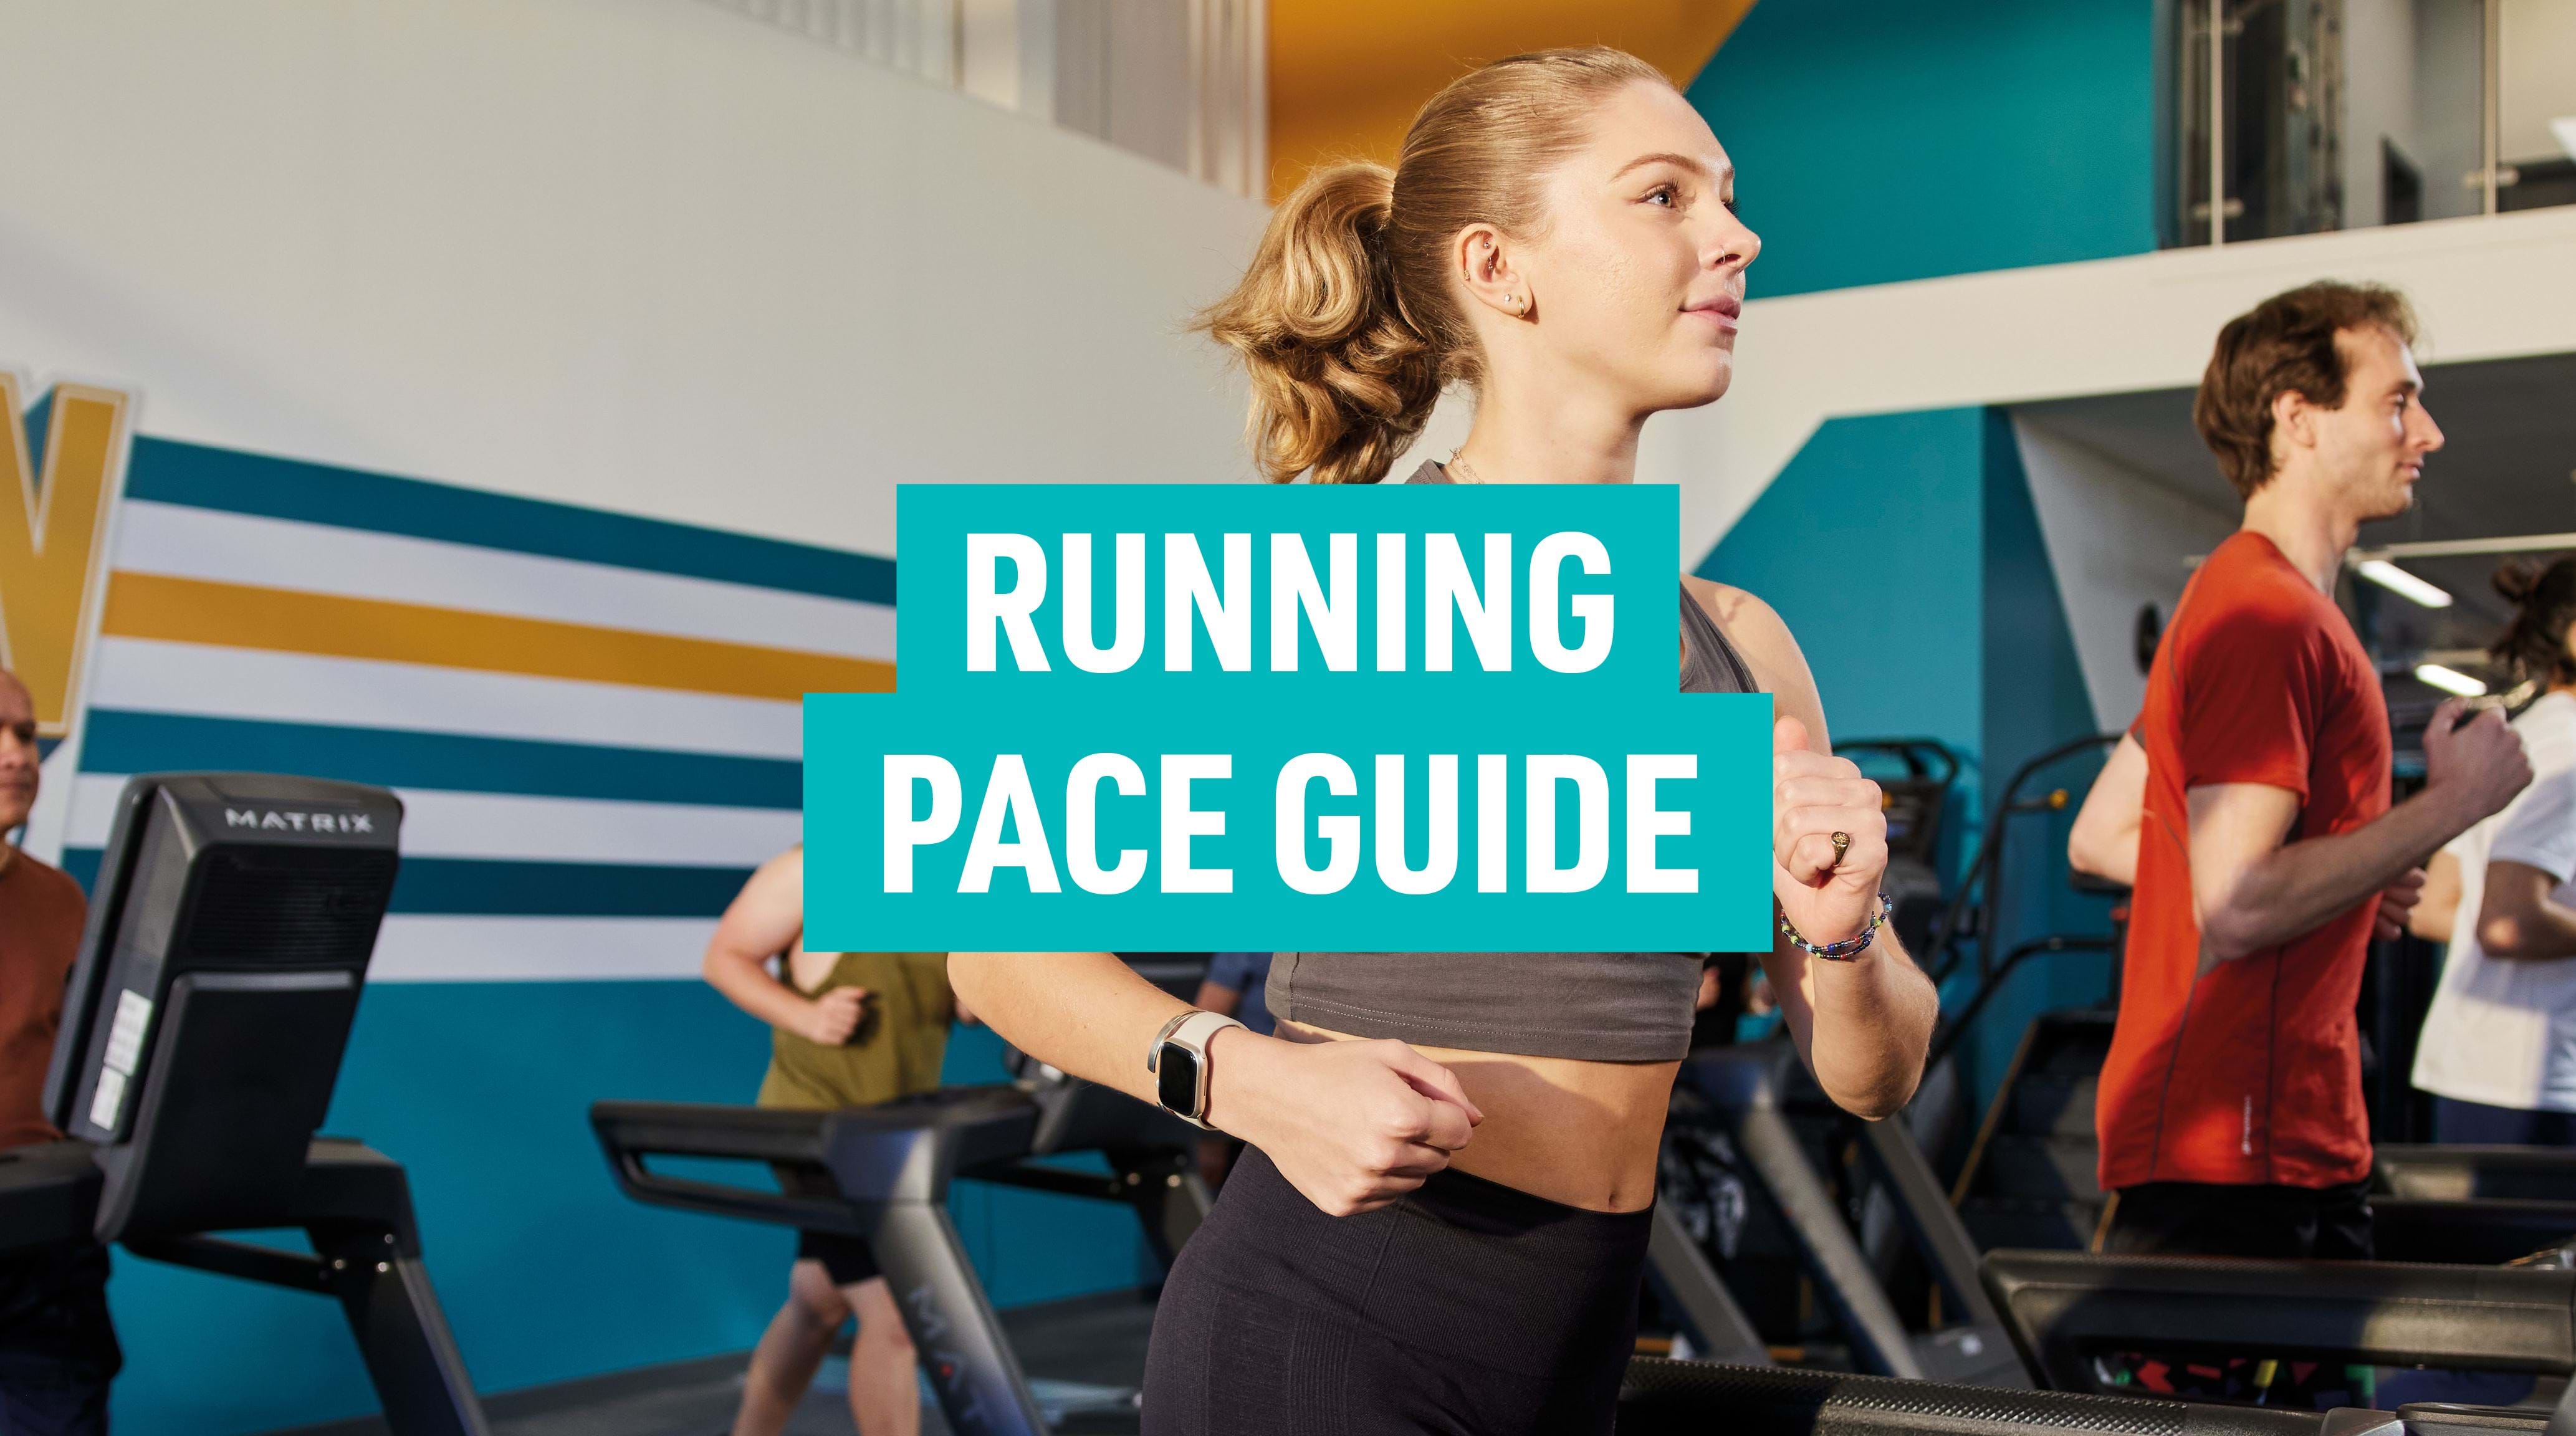 Do you find this pace chart to be accurate in your training vs